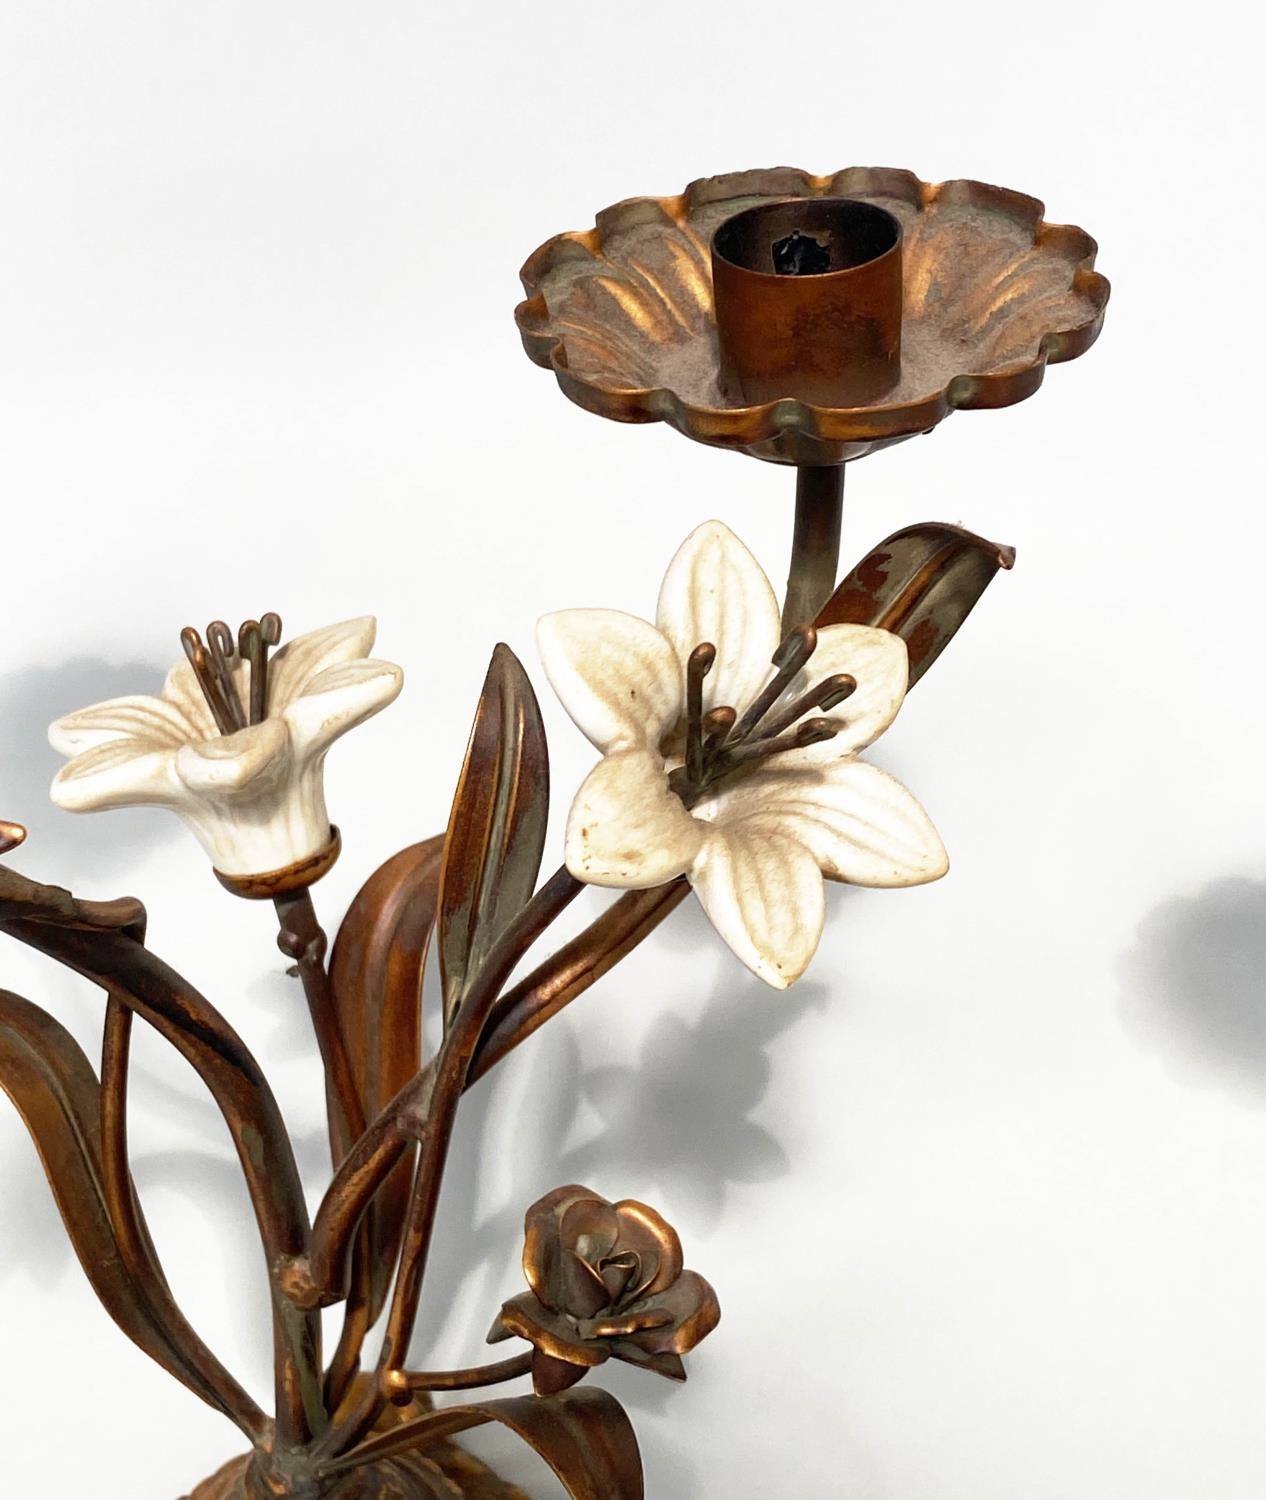 FLOWER CANDLESTICKS, a pair, Italian style cast bronzed metal with ceramic flower heads, 40cm H. (2) - Image 2 of 6